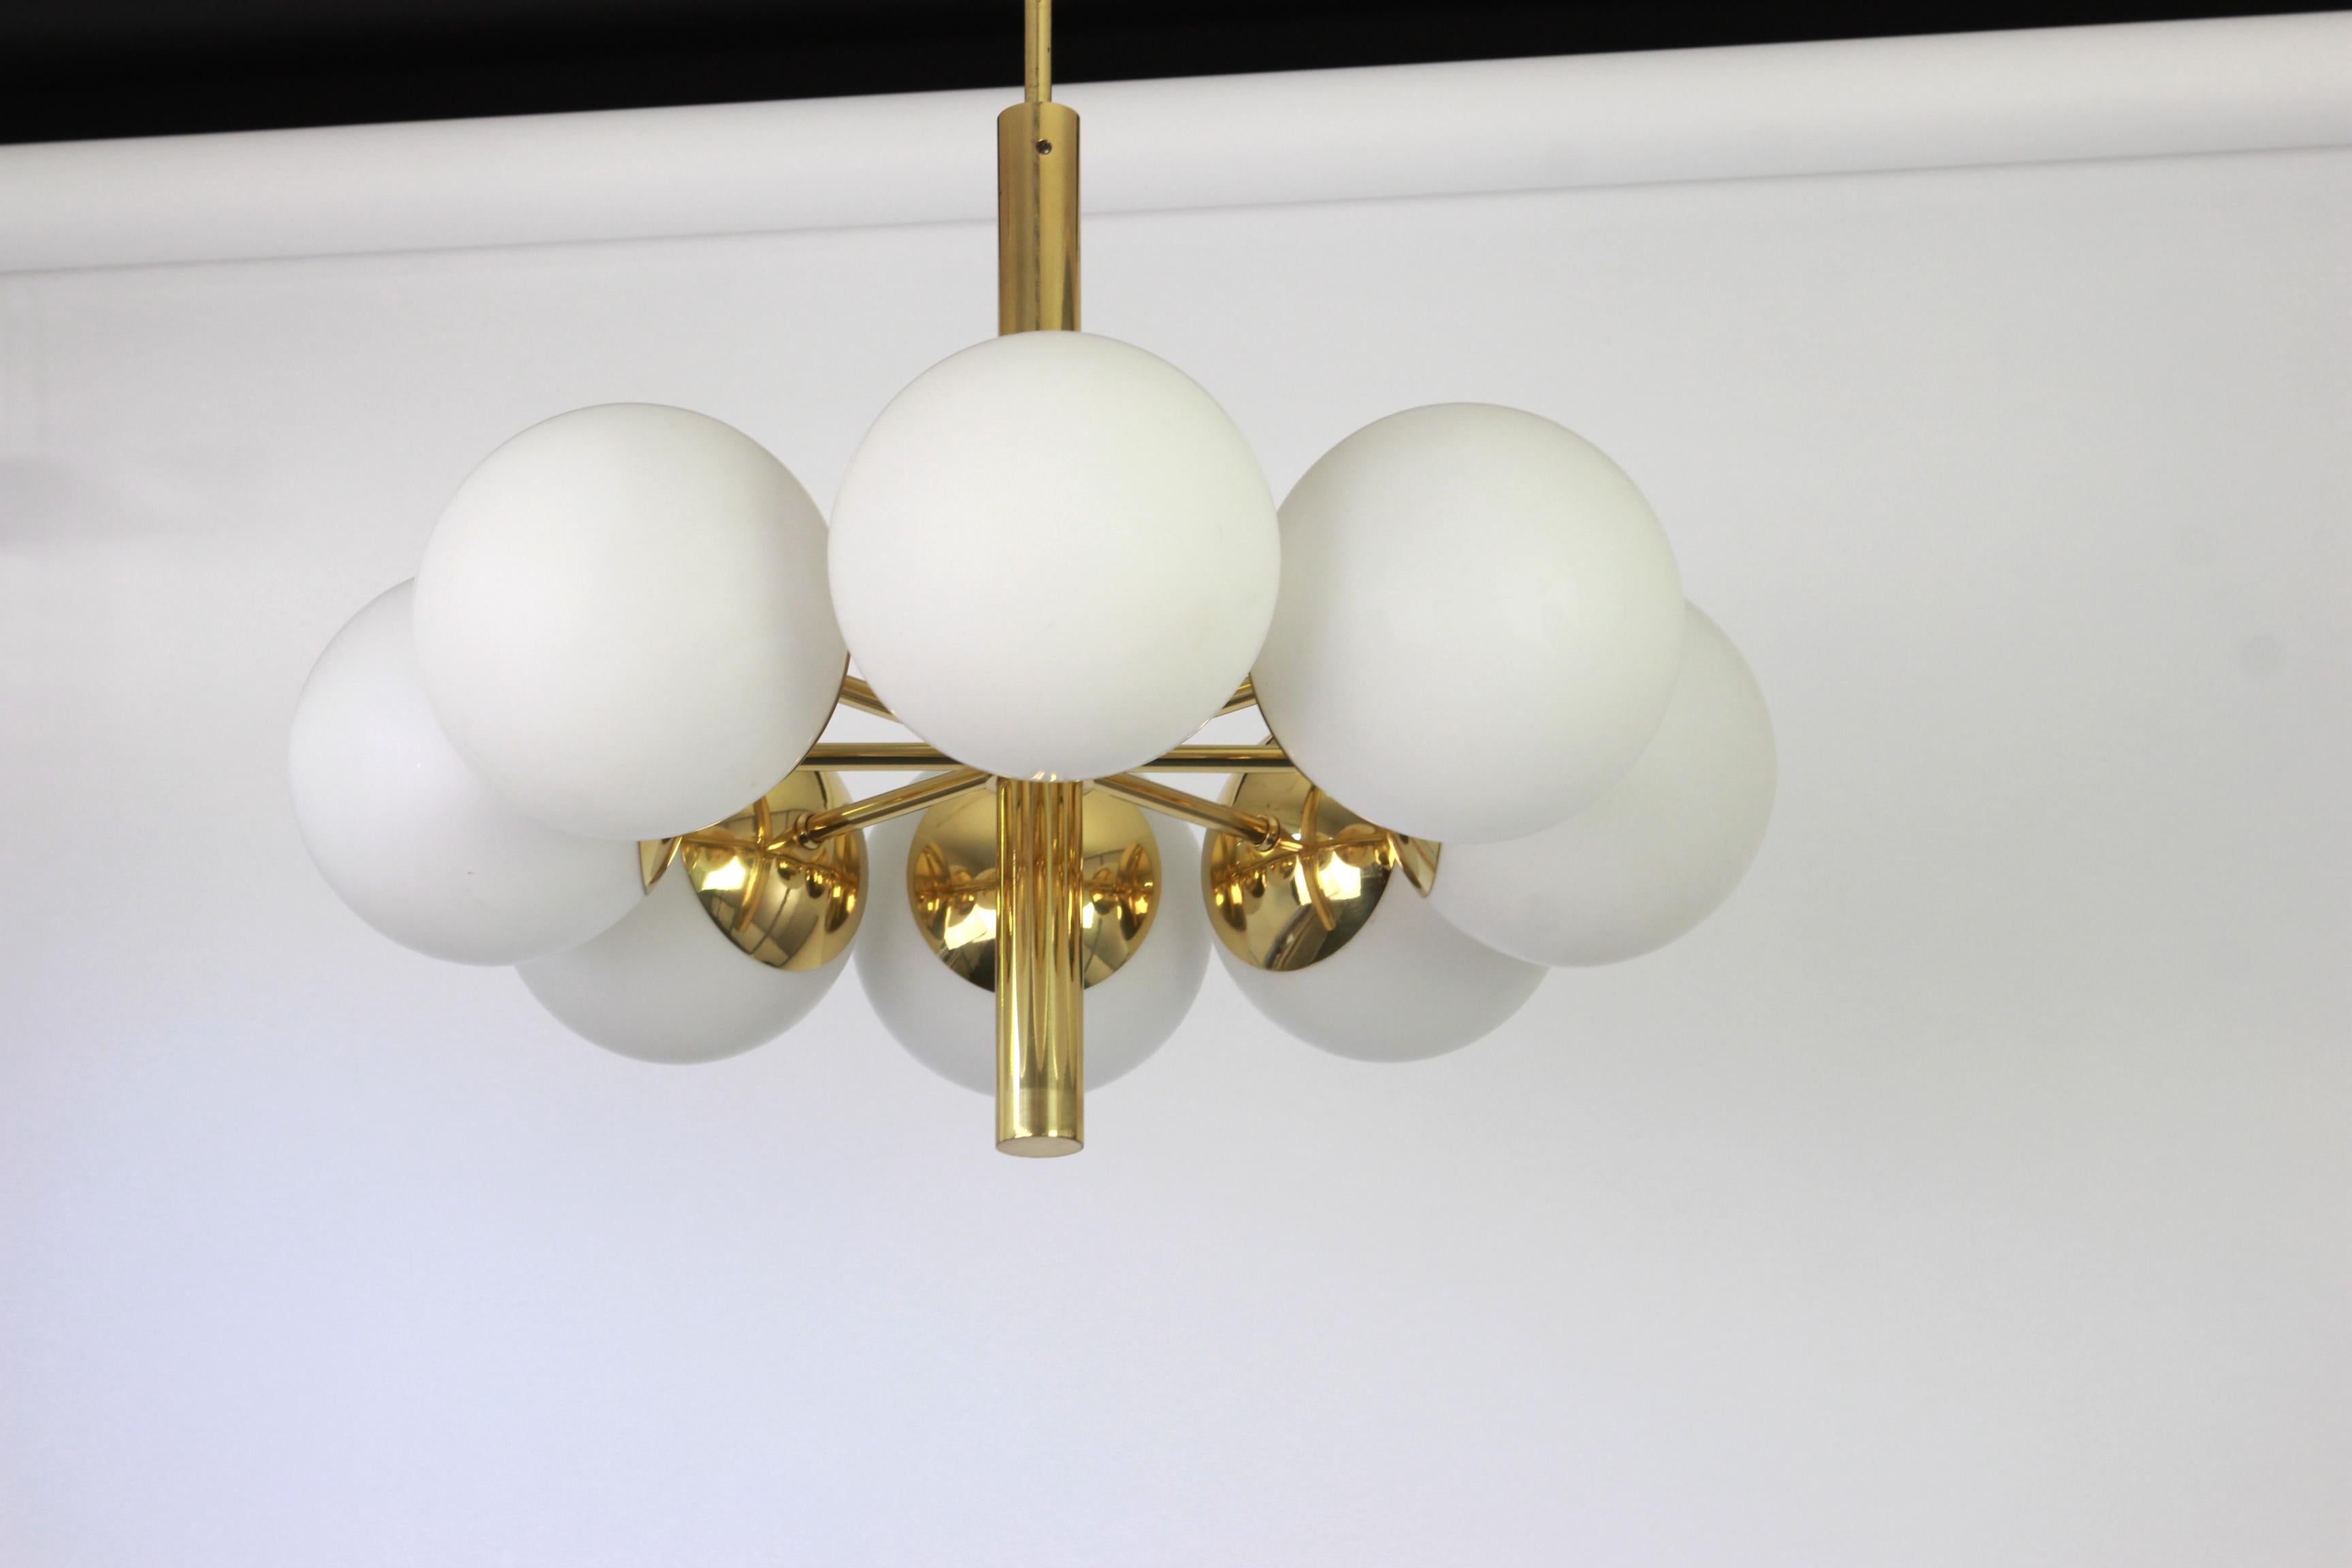 Reserved for Margaret /// 
Stunning radial Sputnik brass chandelier with eight opal glass globes by Kaiser Leuchten, Germany, 1960s.
High quality and in very good condition. Cleaned, well-wired and ready to use. 

The fixture requires 8x E14